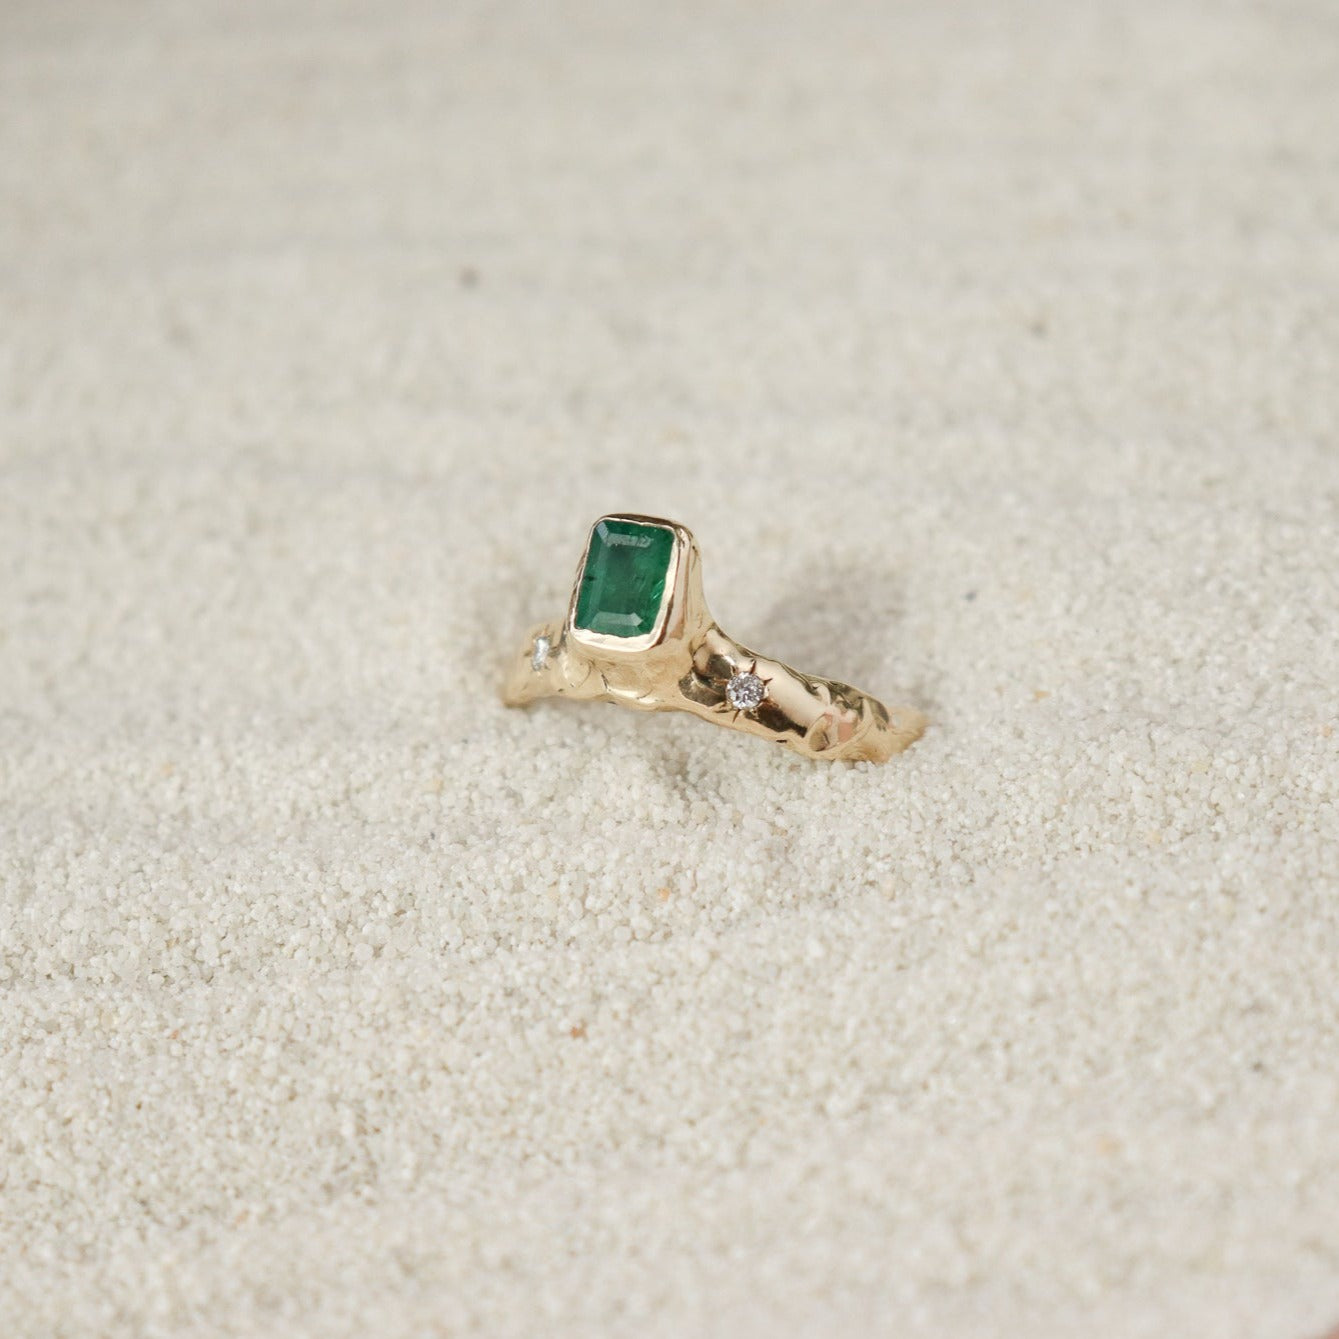 An emerald cut  emerald is bezel set in 14k gold  on a wide band with two star set diamonds on the side of the main stone.